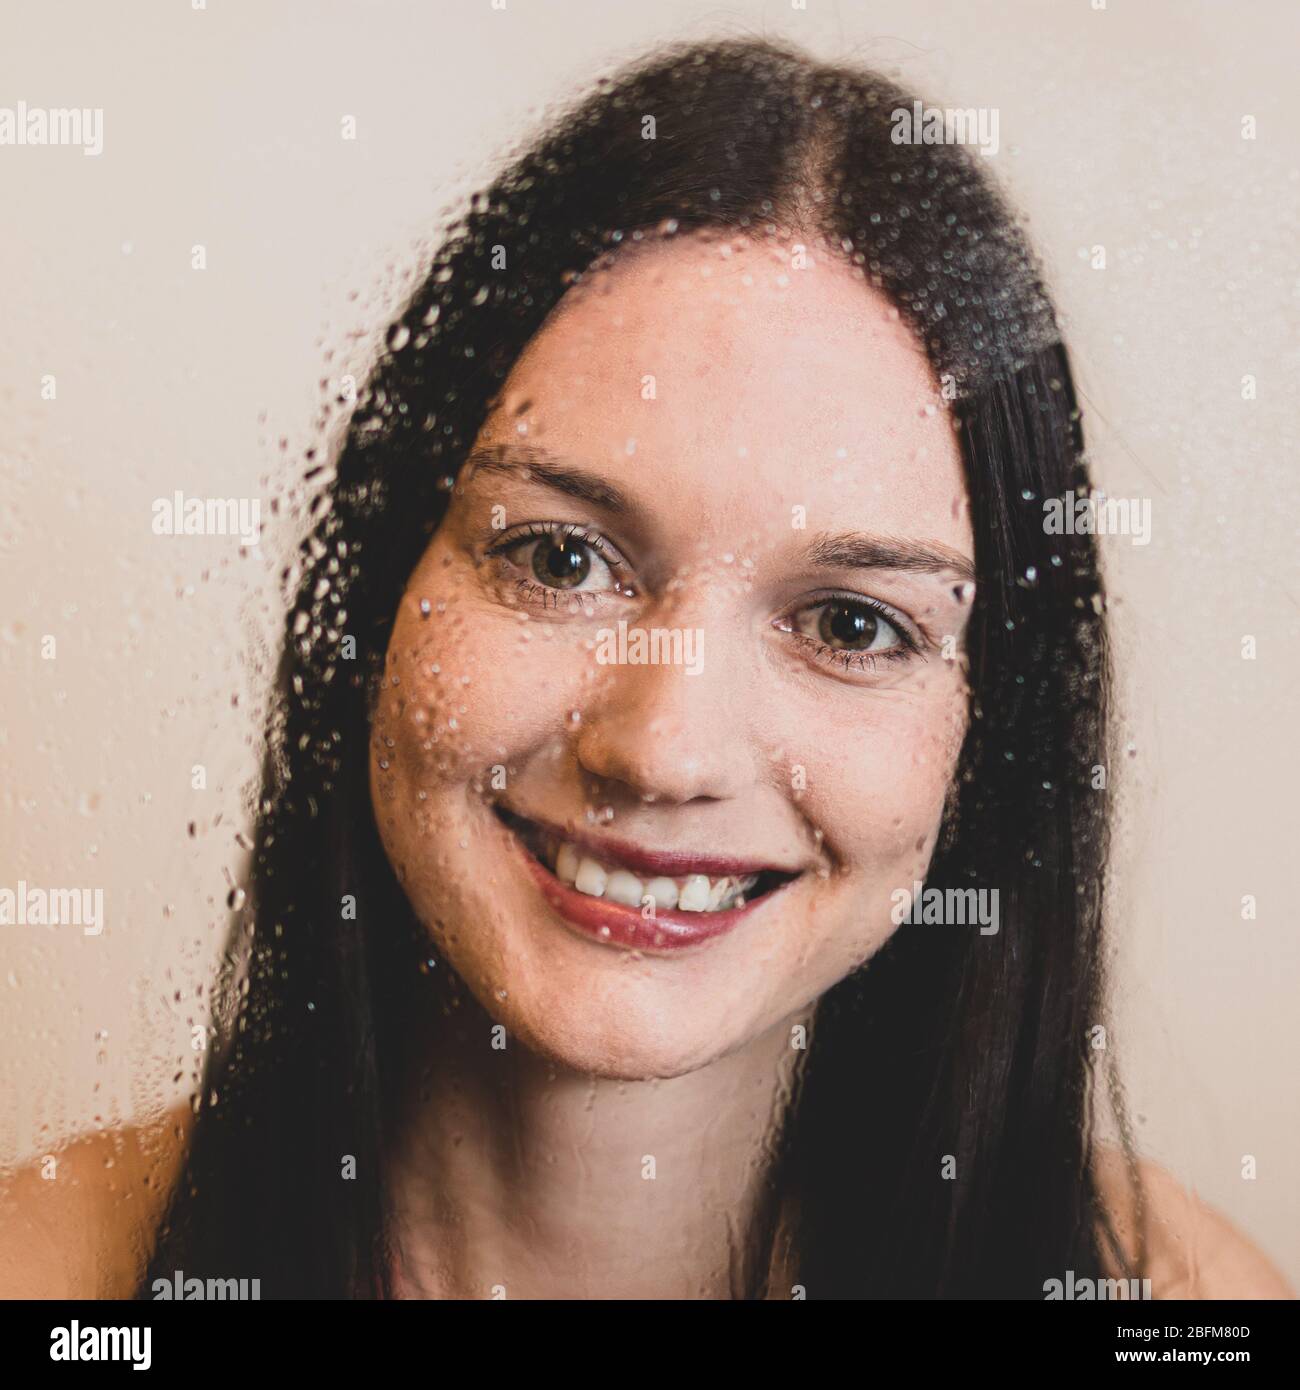 Face of happy girl with dark long hair and red lips smiling behind a wet glass window. Royalty free stock photo. Stock Photo